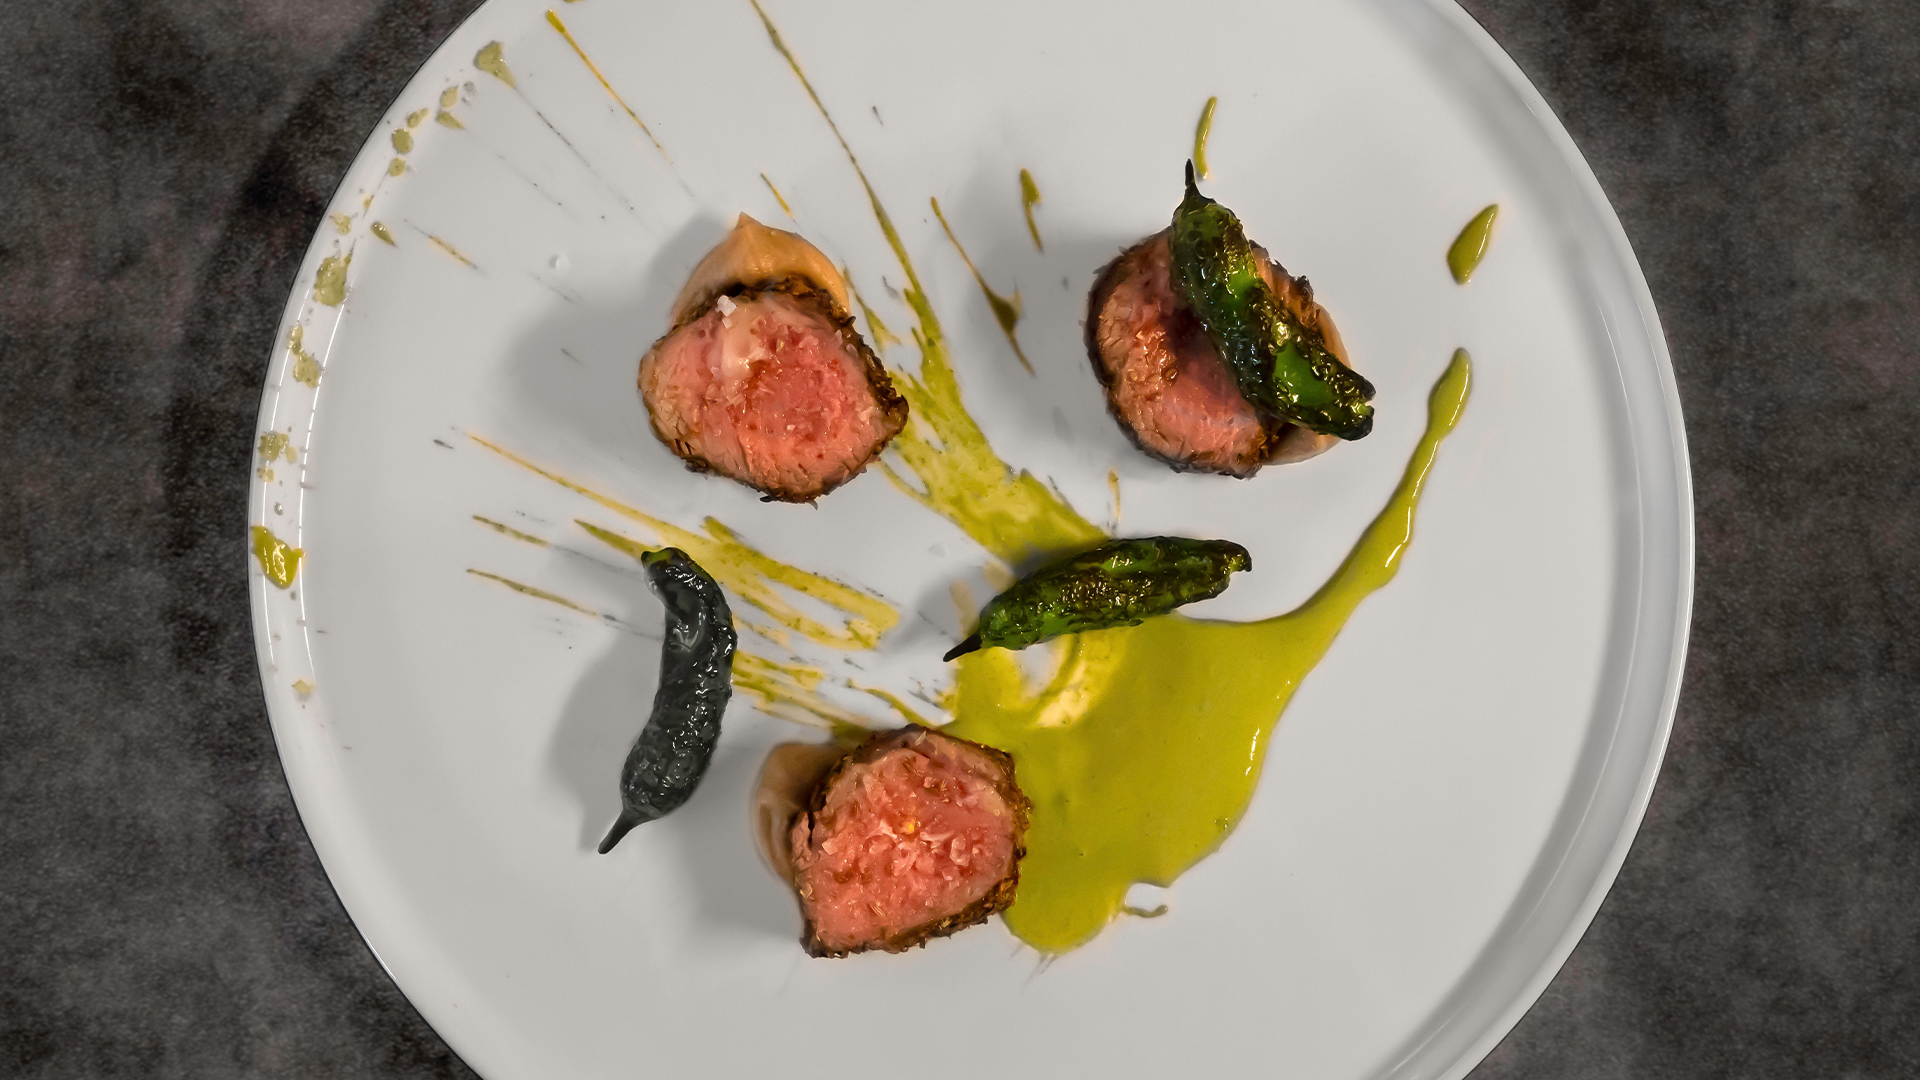 Spice crusted lamb loin with mint and chestnuts